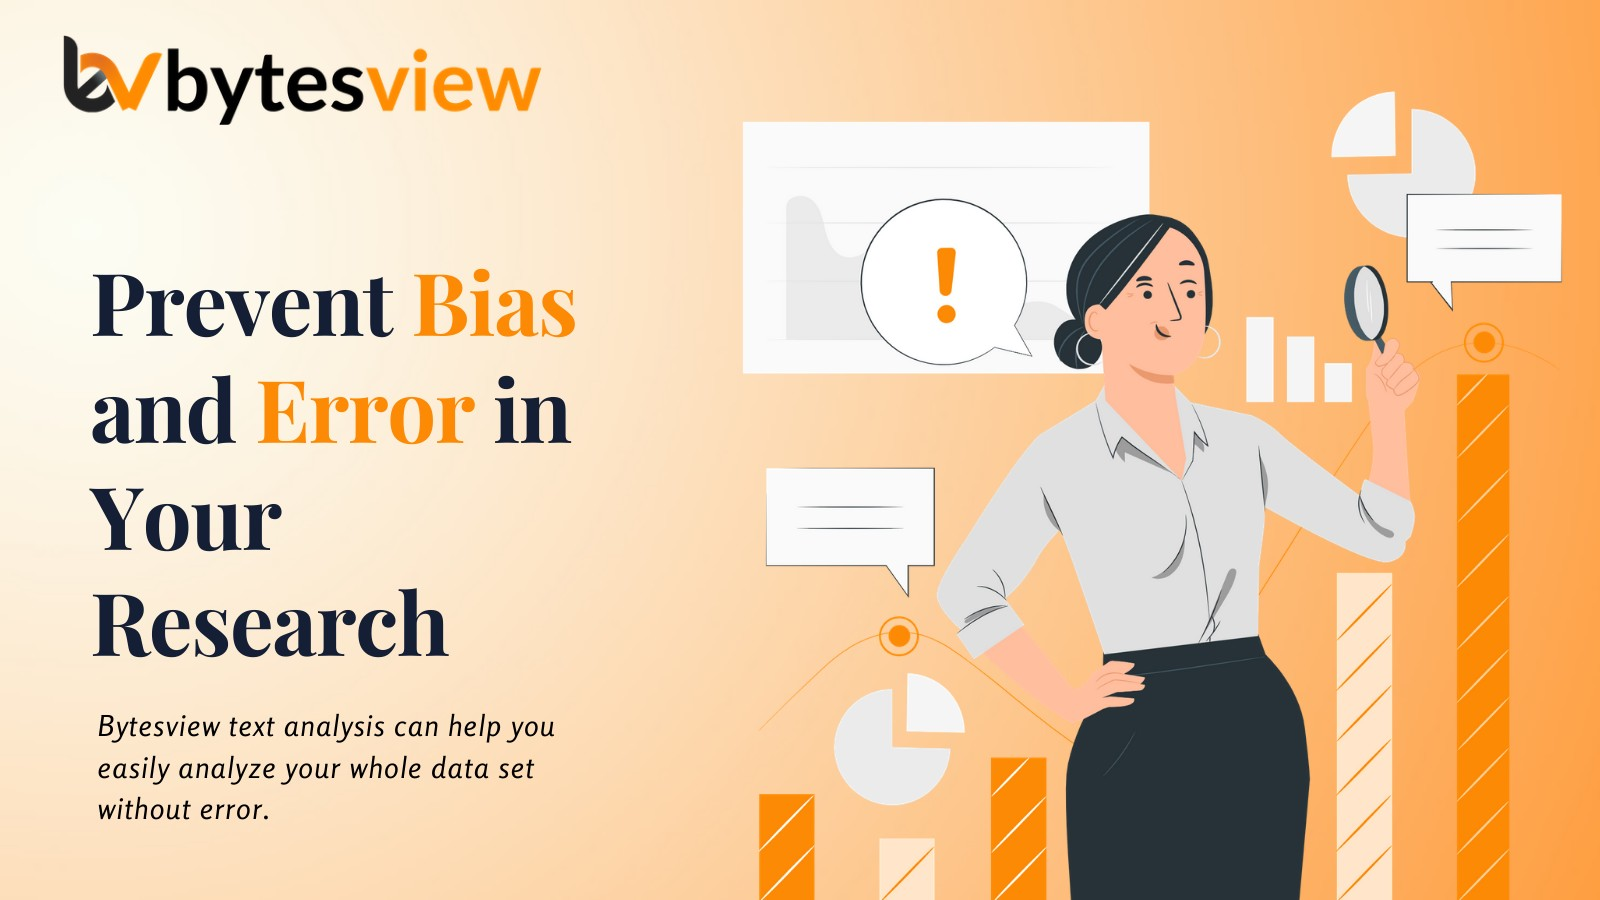 Use the @bytesview text analysis tool to prevent your #research data from human errors and bias.?